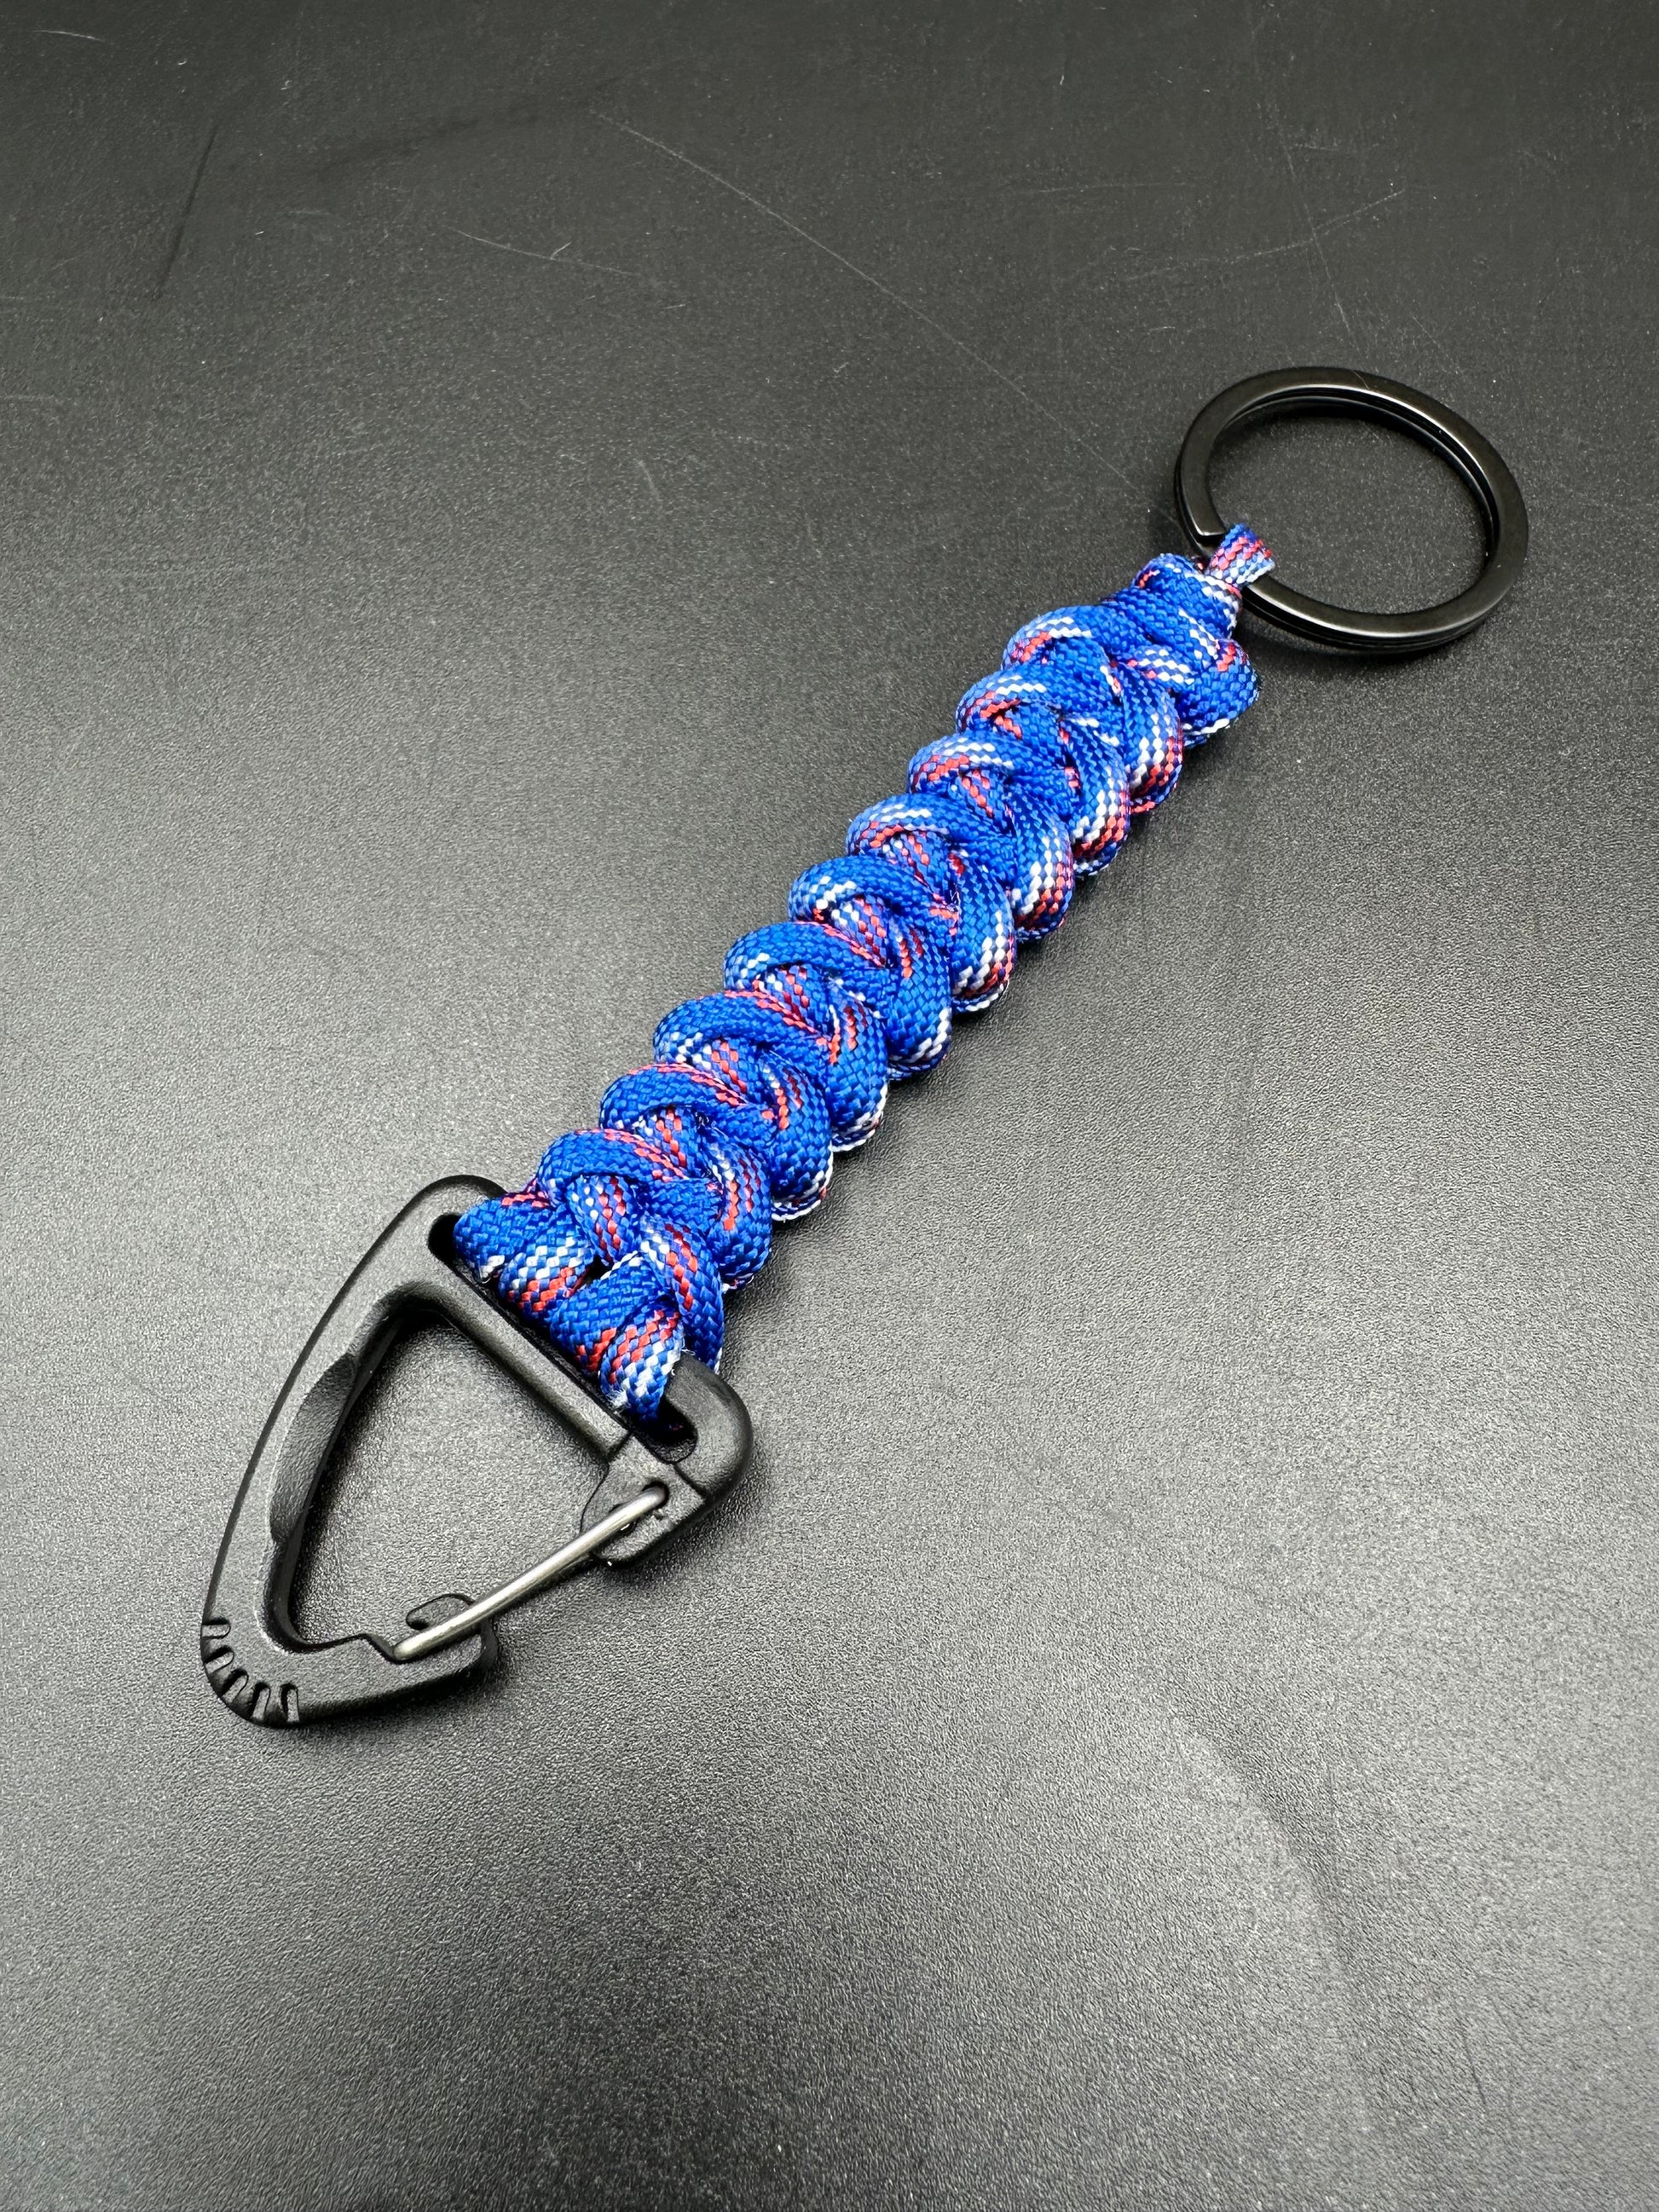 Tactical EDC Paracord keyring with triangle clip and key ring in Patriot Blue coloured shark jaw weave 